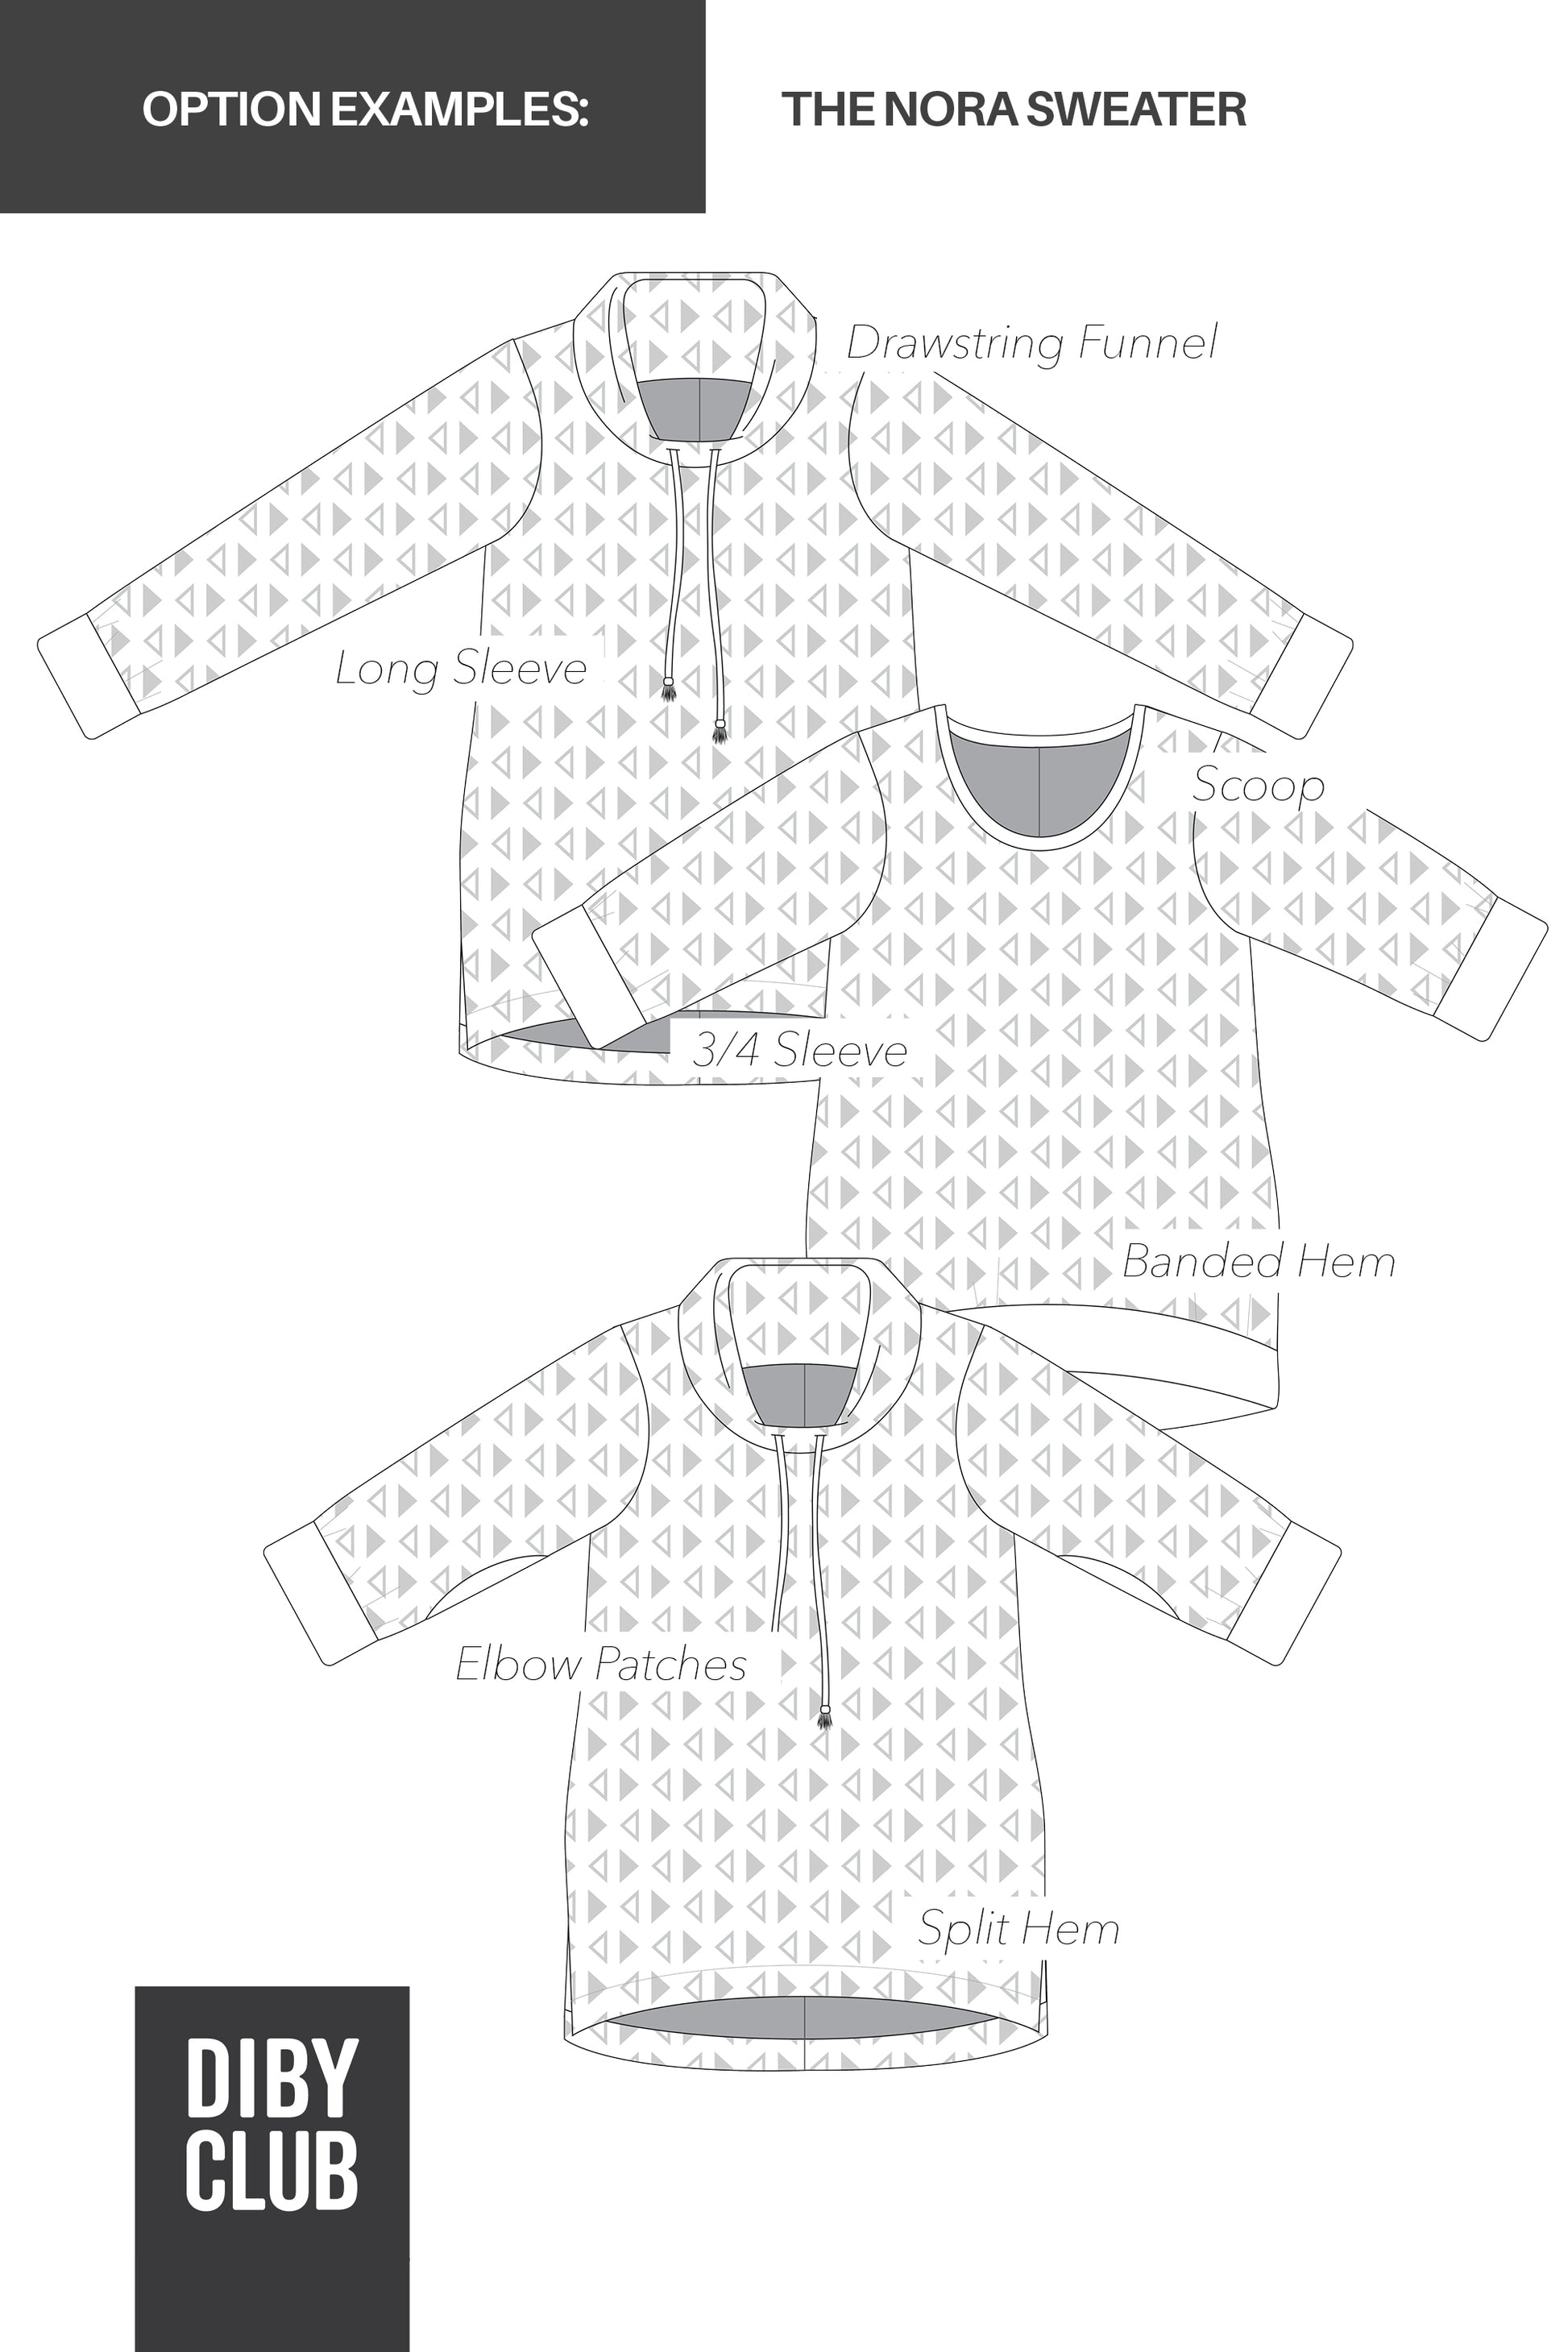 The Nora Sweater Pattern Options.